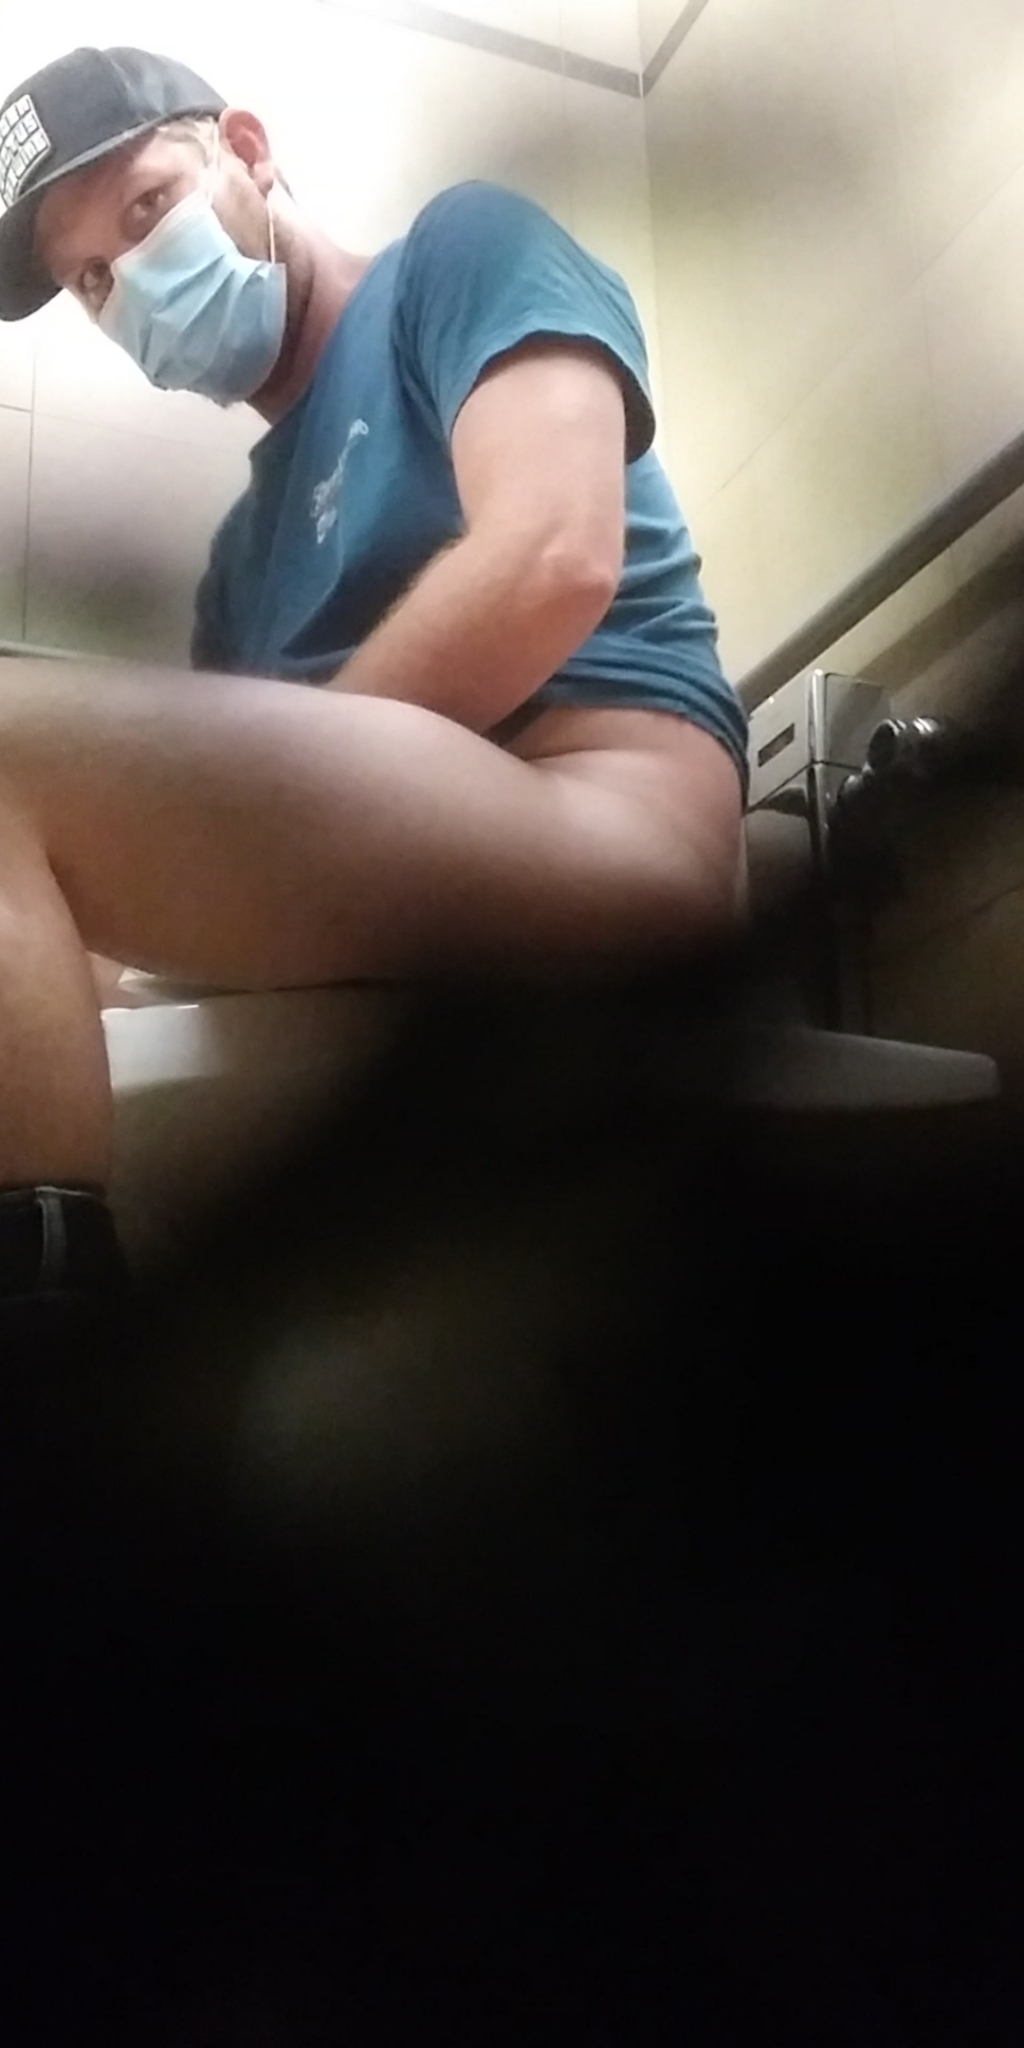 Gassy twink on toilet